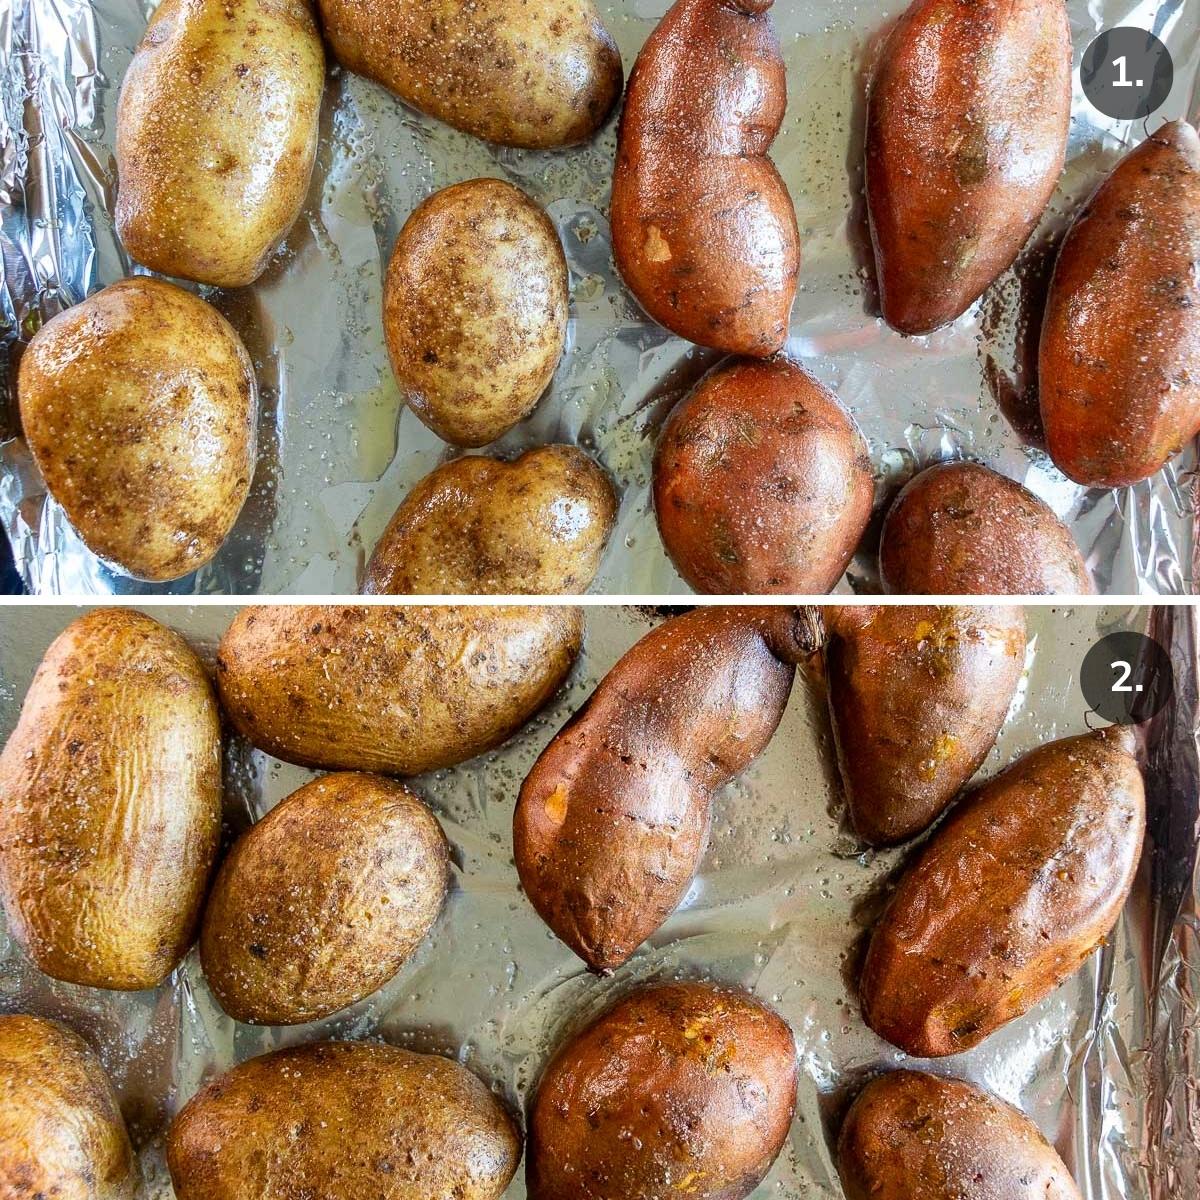 Idaho and sweet potatoes dressed with olive oil and salt on a baking tray before and after cooked. 